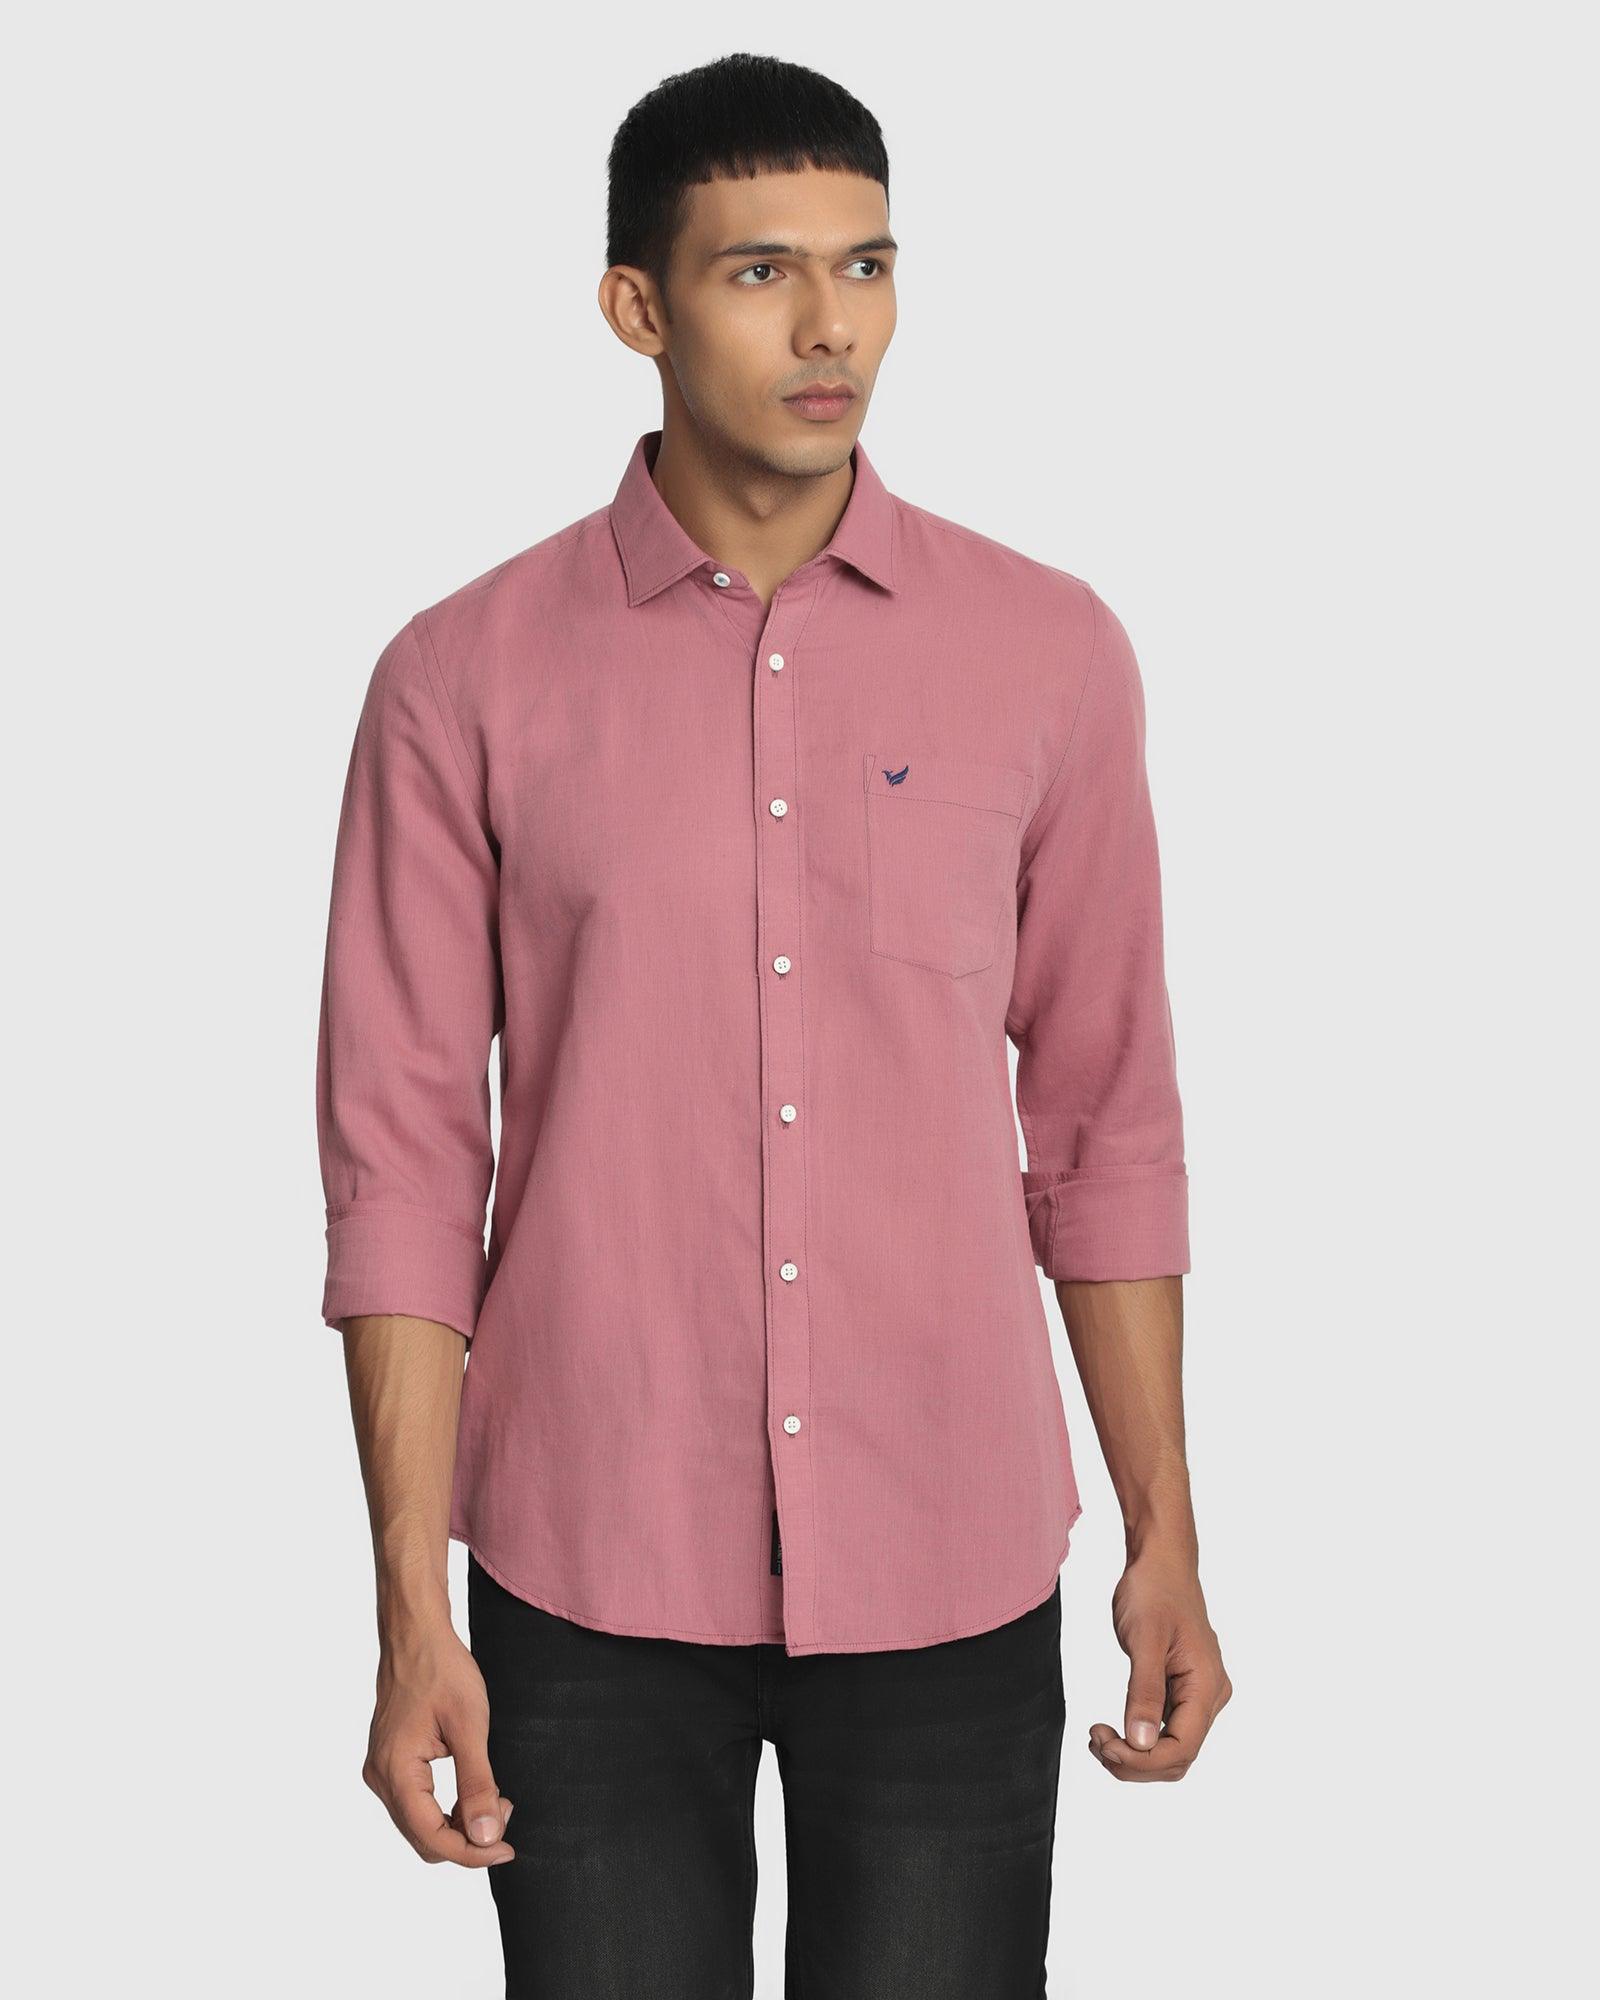 Linen Casual Pink Solid Shirt - Salmon